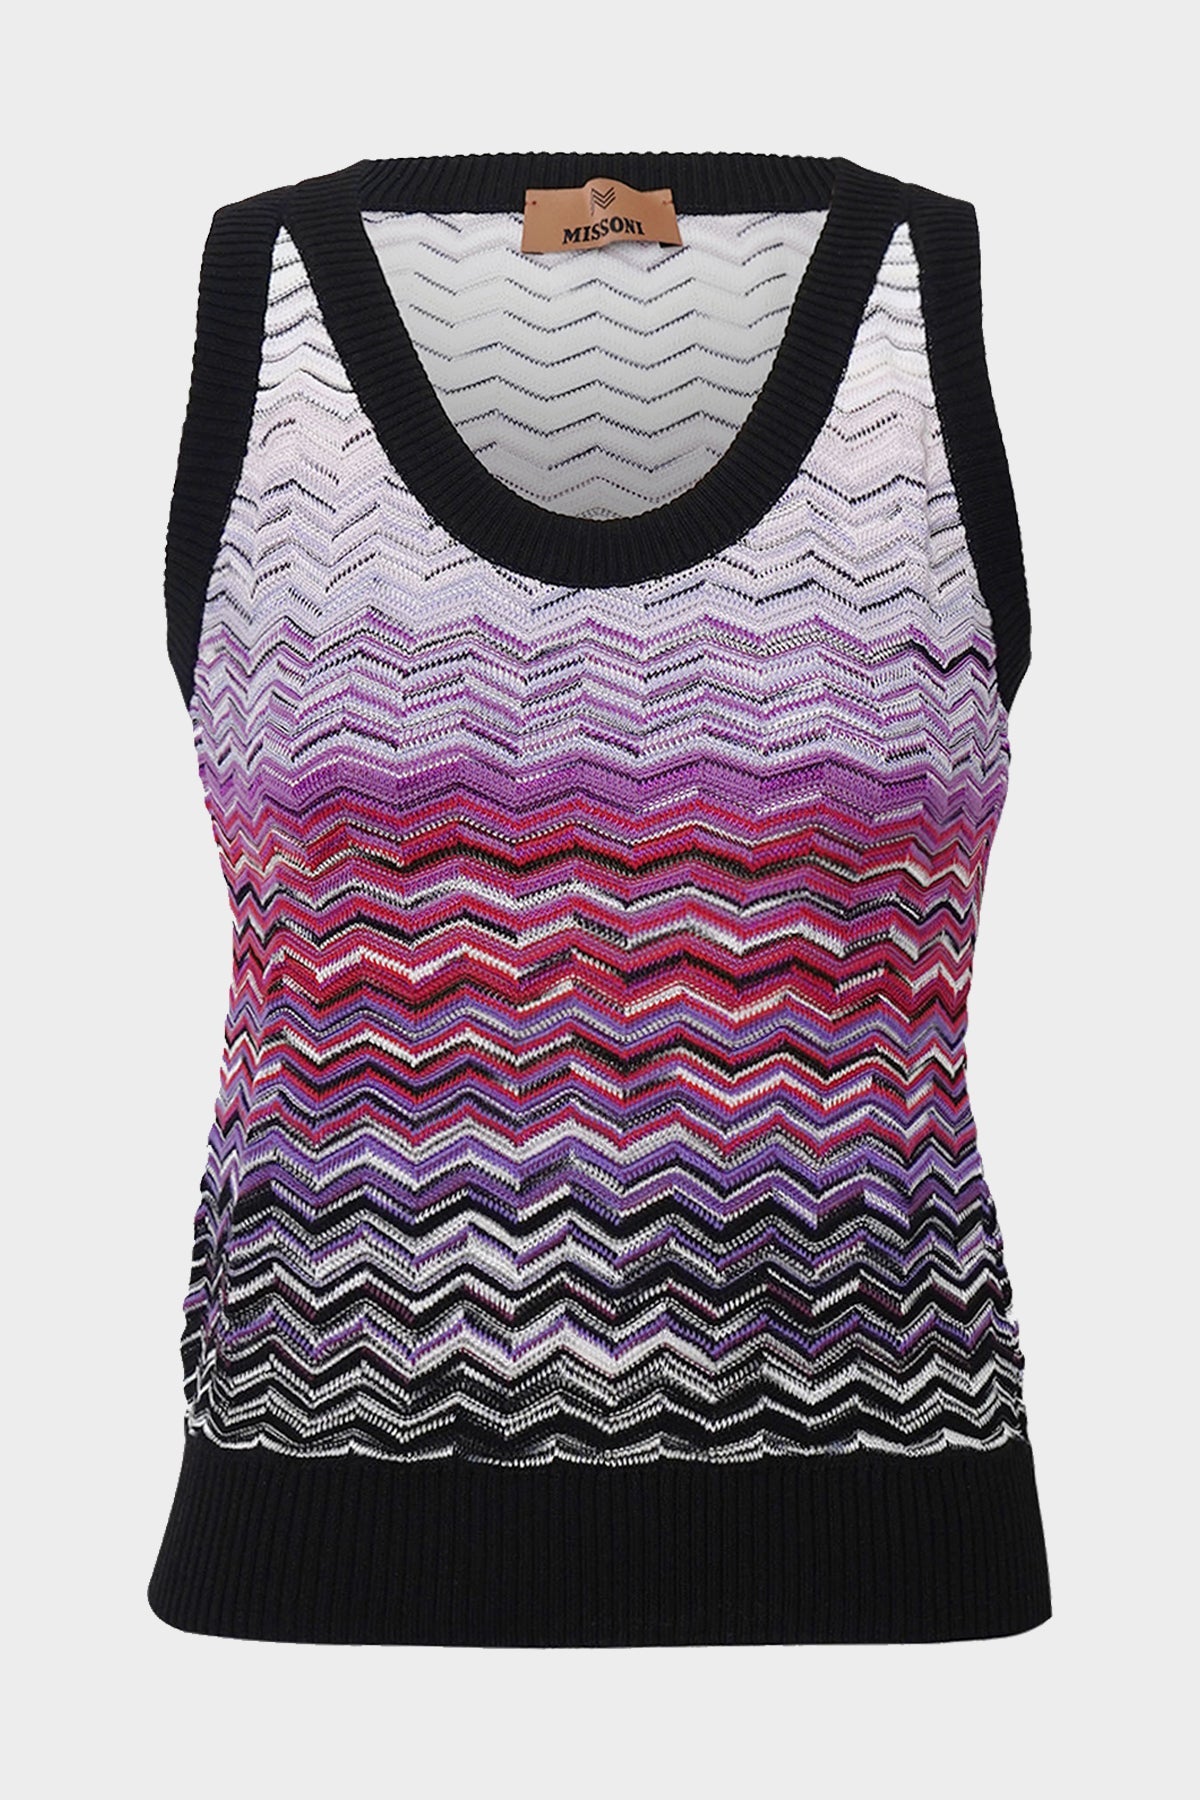 Zig-Zag Knitted Tank Top in Red Black and Blue - shop-olivia.com